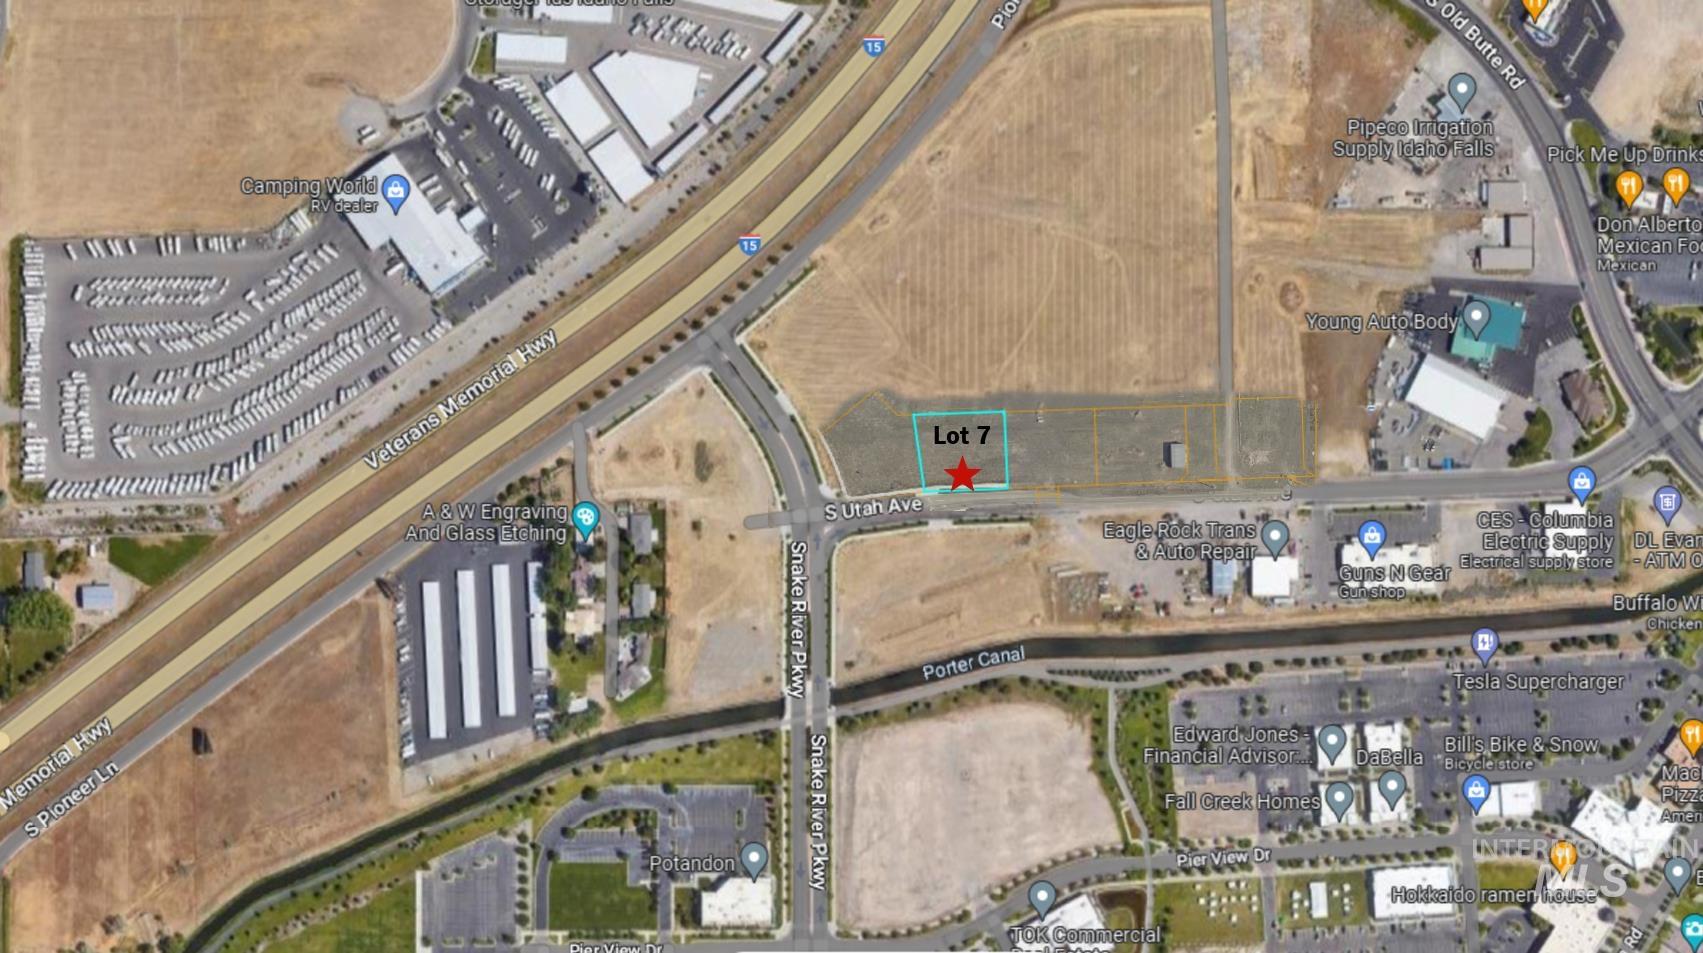 TBD S Utah Ave. Lot 7 Block 8, Idaho Falls, Idaho 83402, Business/Commercial For Sale, Price $371,170,MLS 98873733